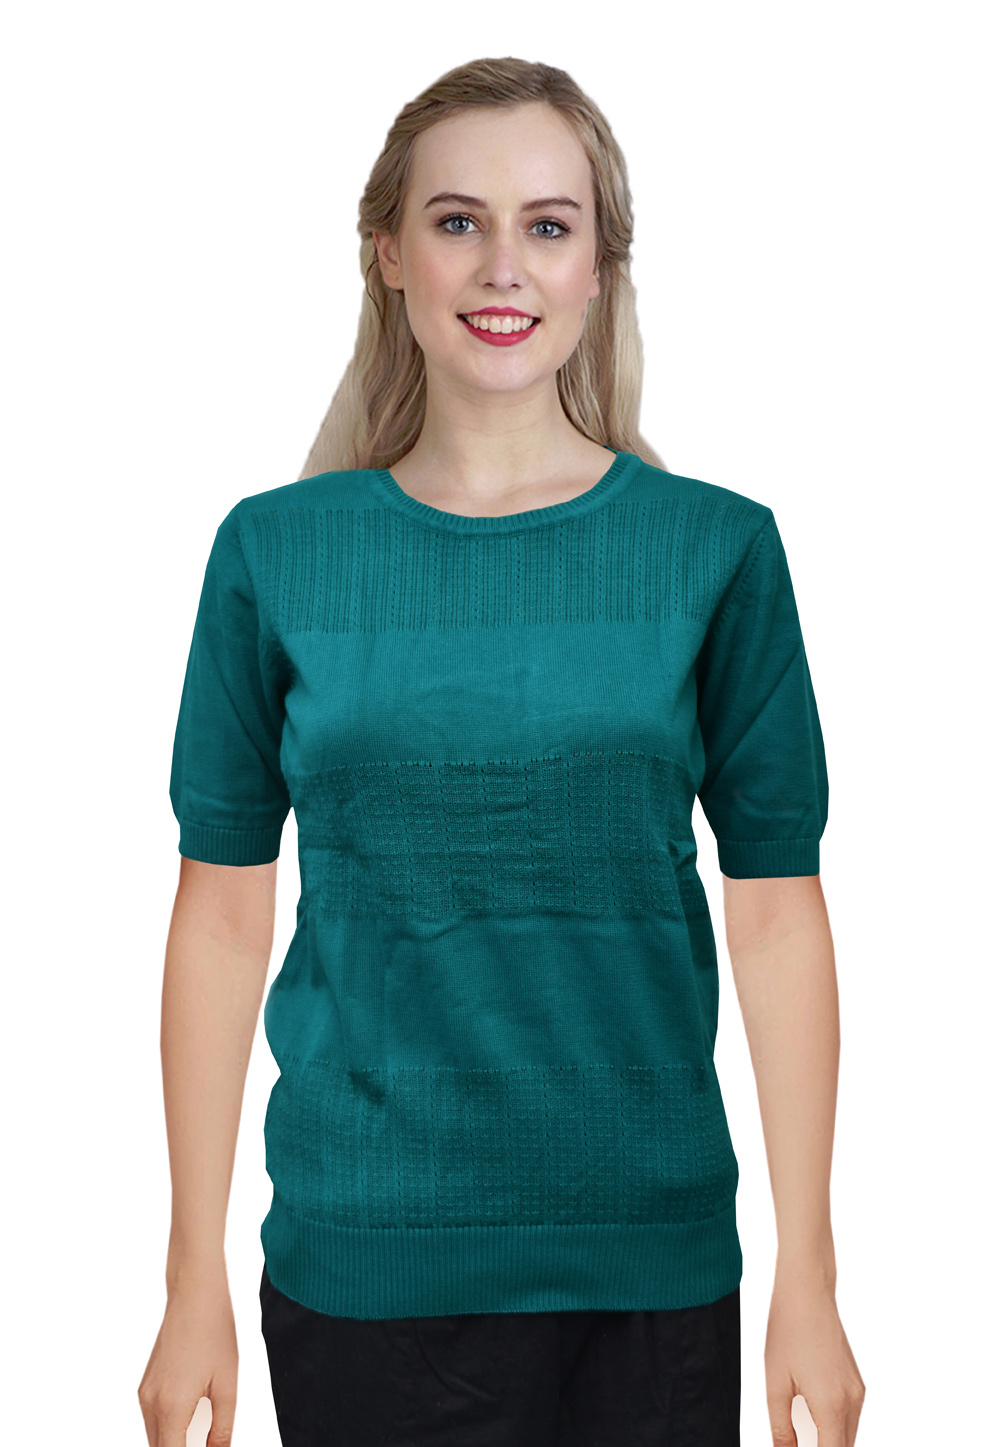 Teal Knitted Sweater Tops 214257